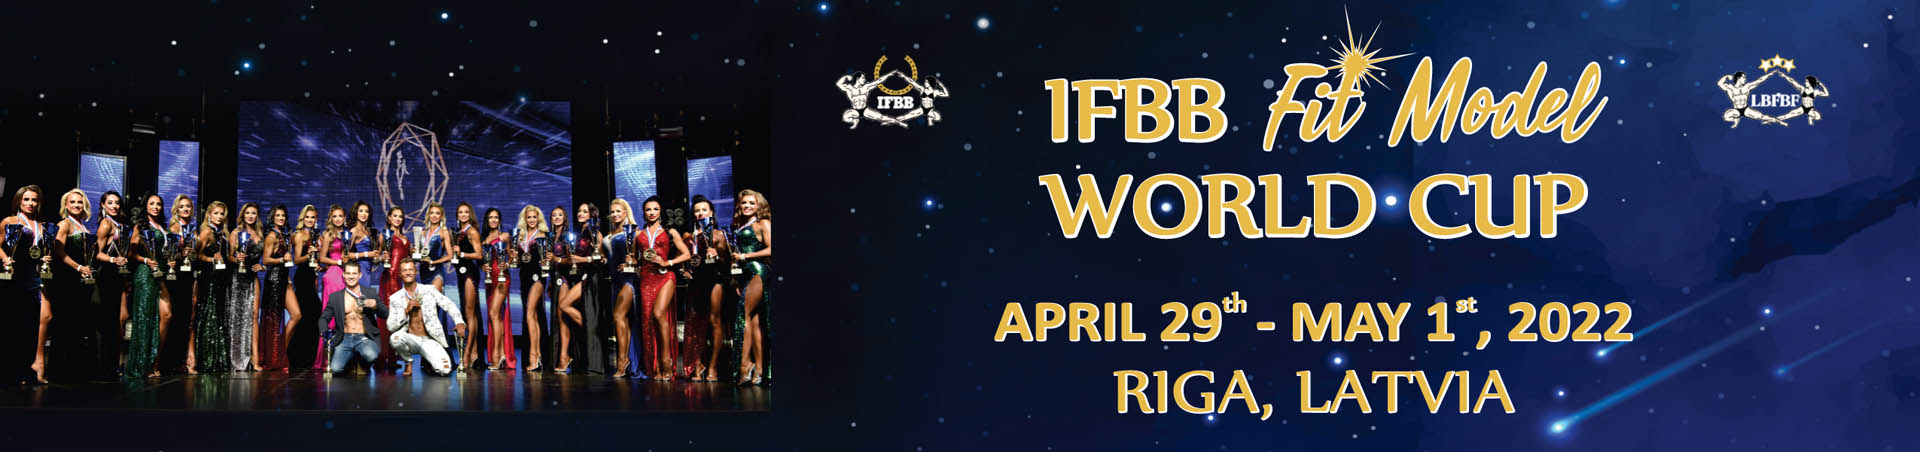 IFBB Fit Model World Cup